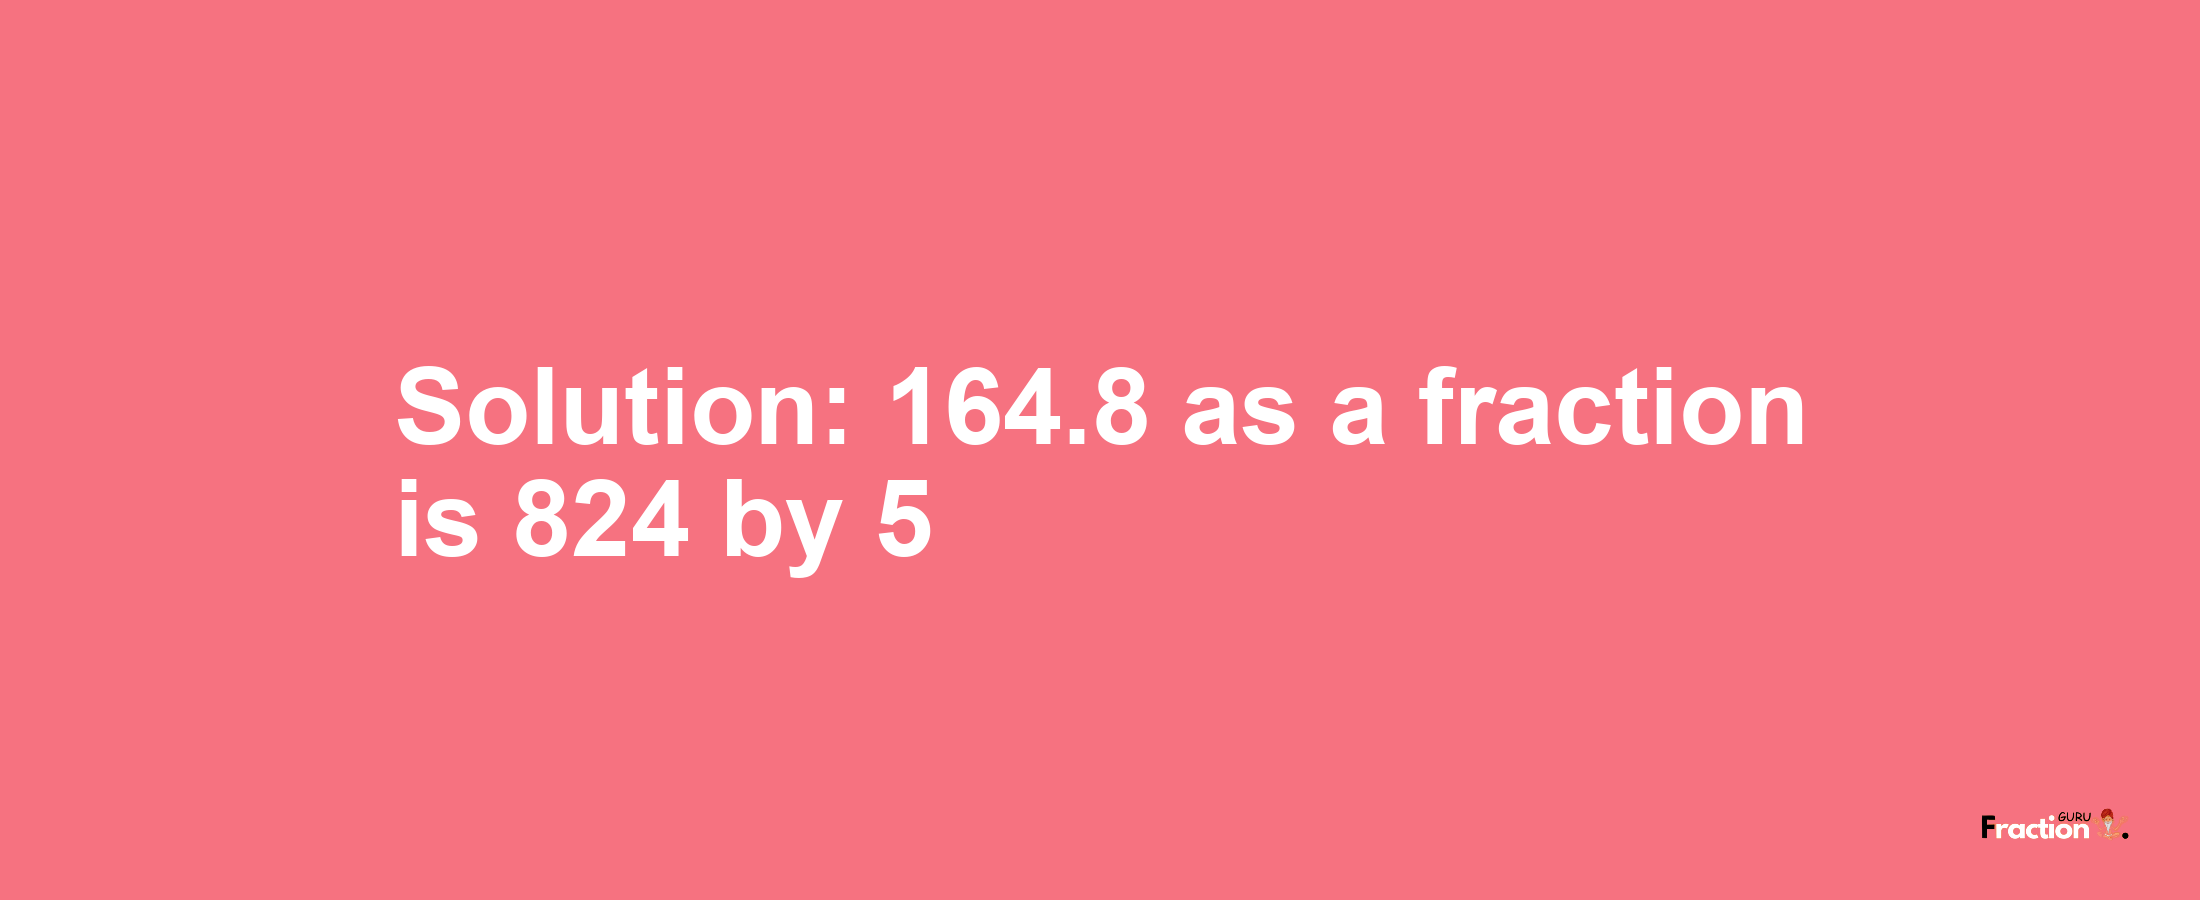 Solution:164.8 as a fraction is 824/5